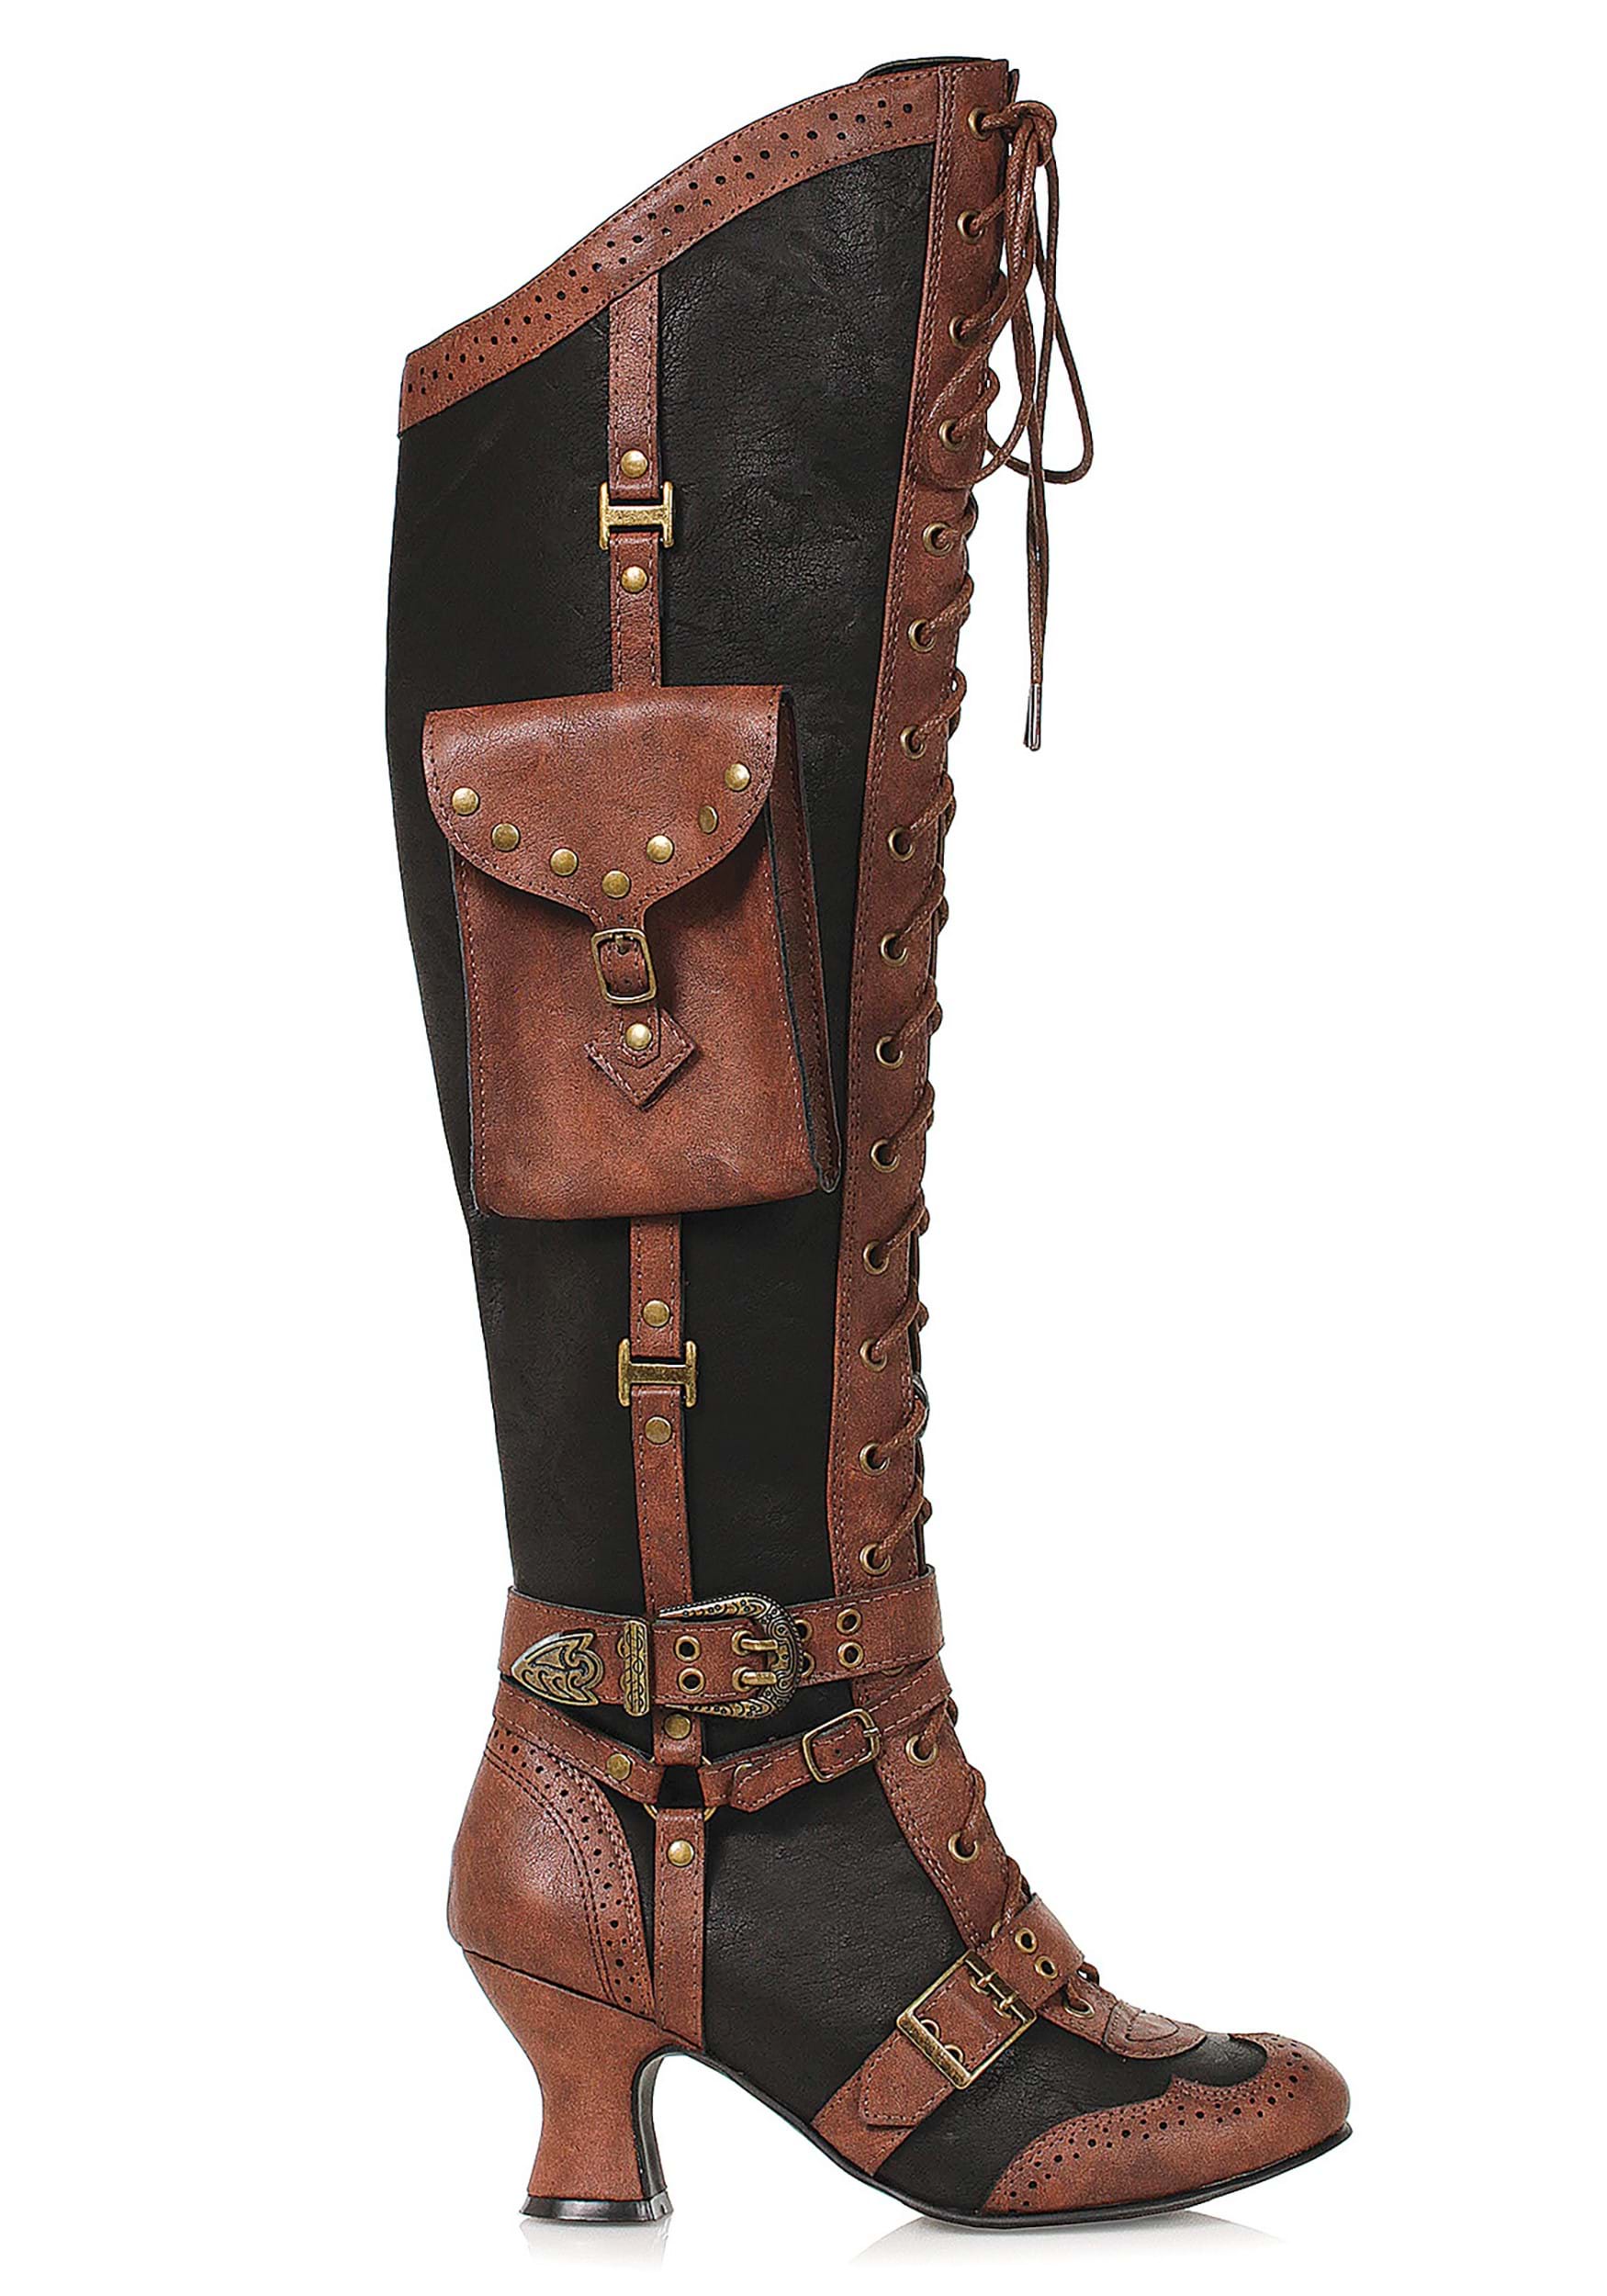 Image of Lace Up Steampunk Heeled Boots ID EE254INGRIDBR-7